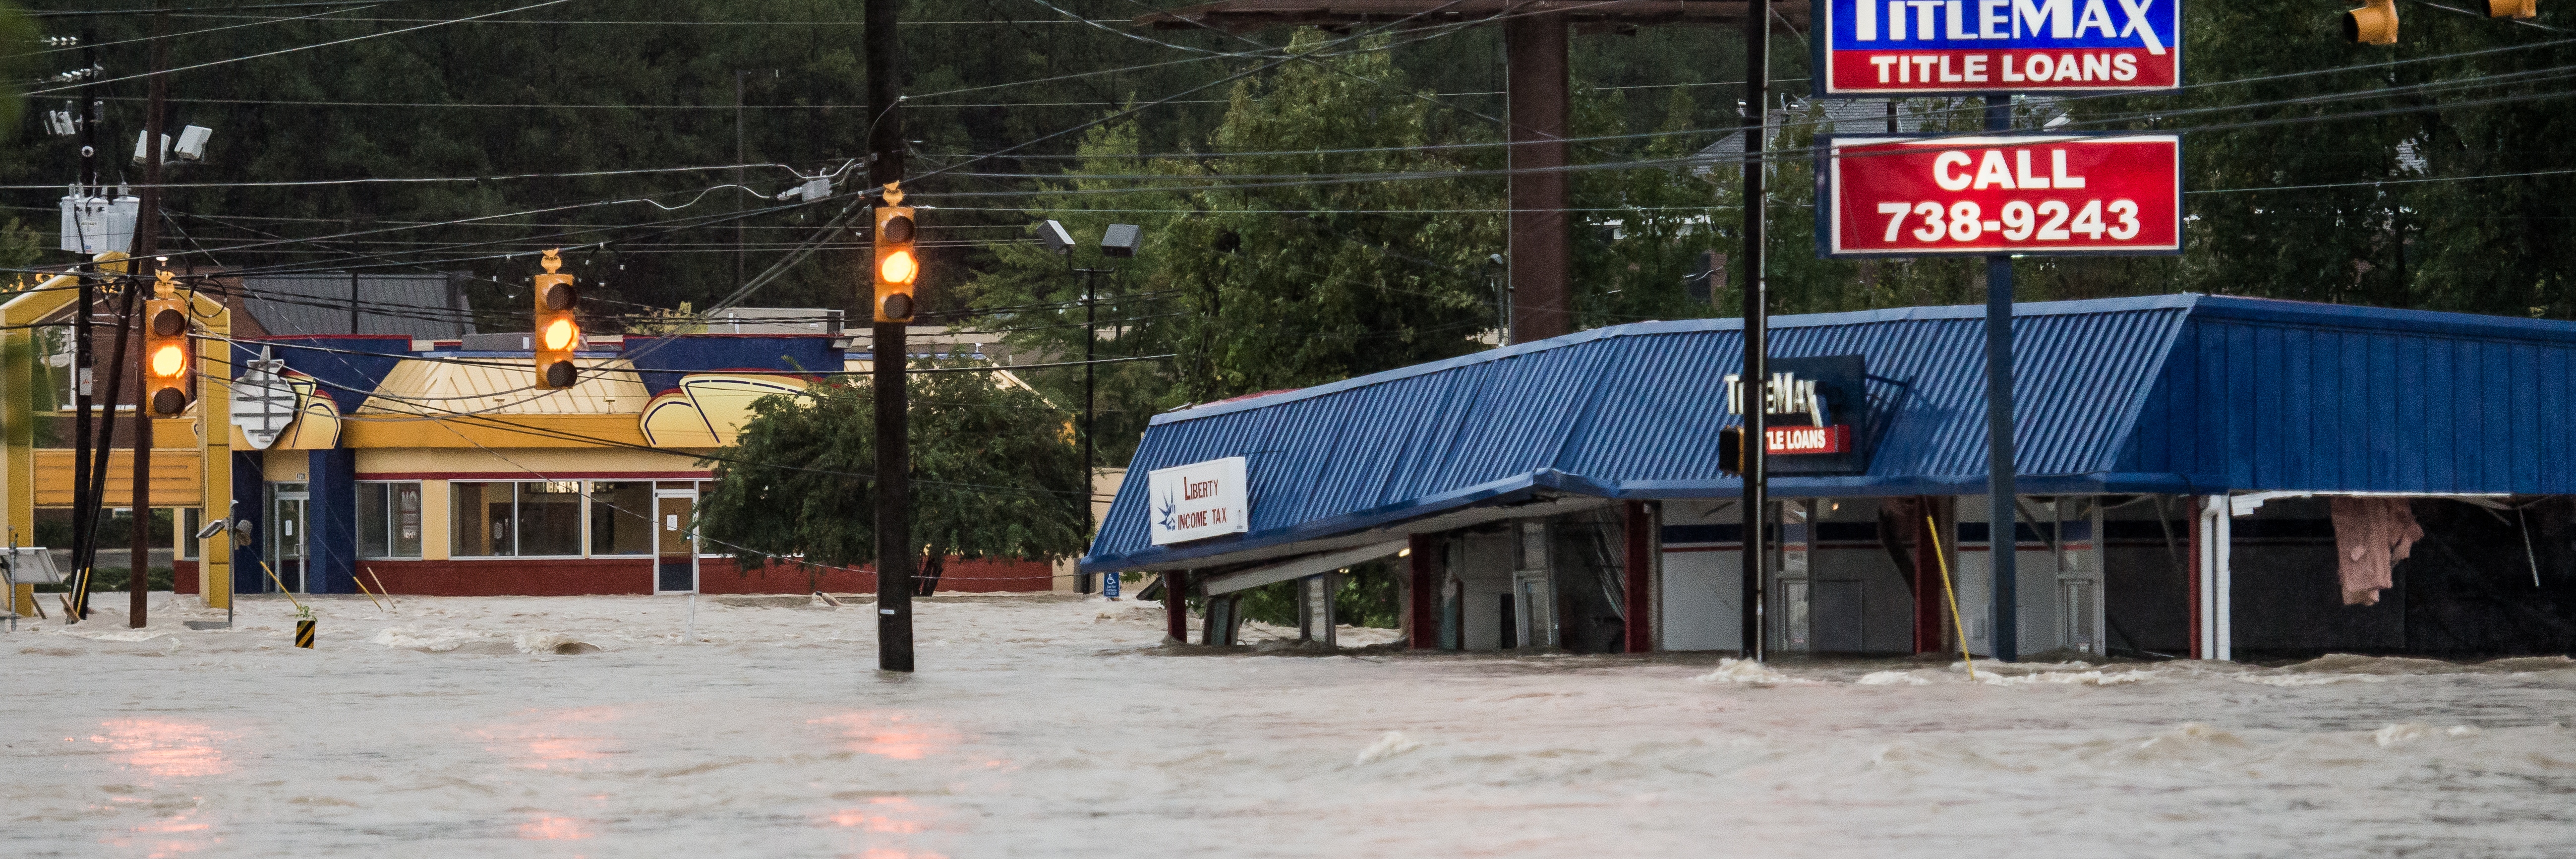 Lack of Flood Insurance Could Leave Small Businesses Underwater